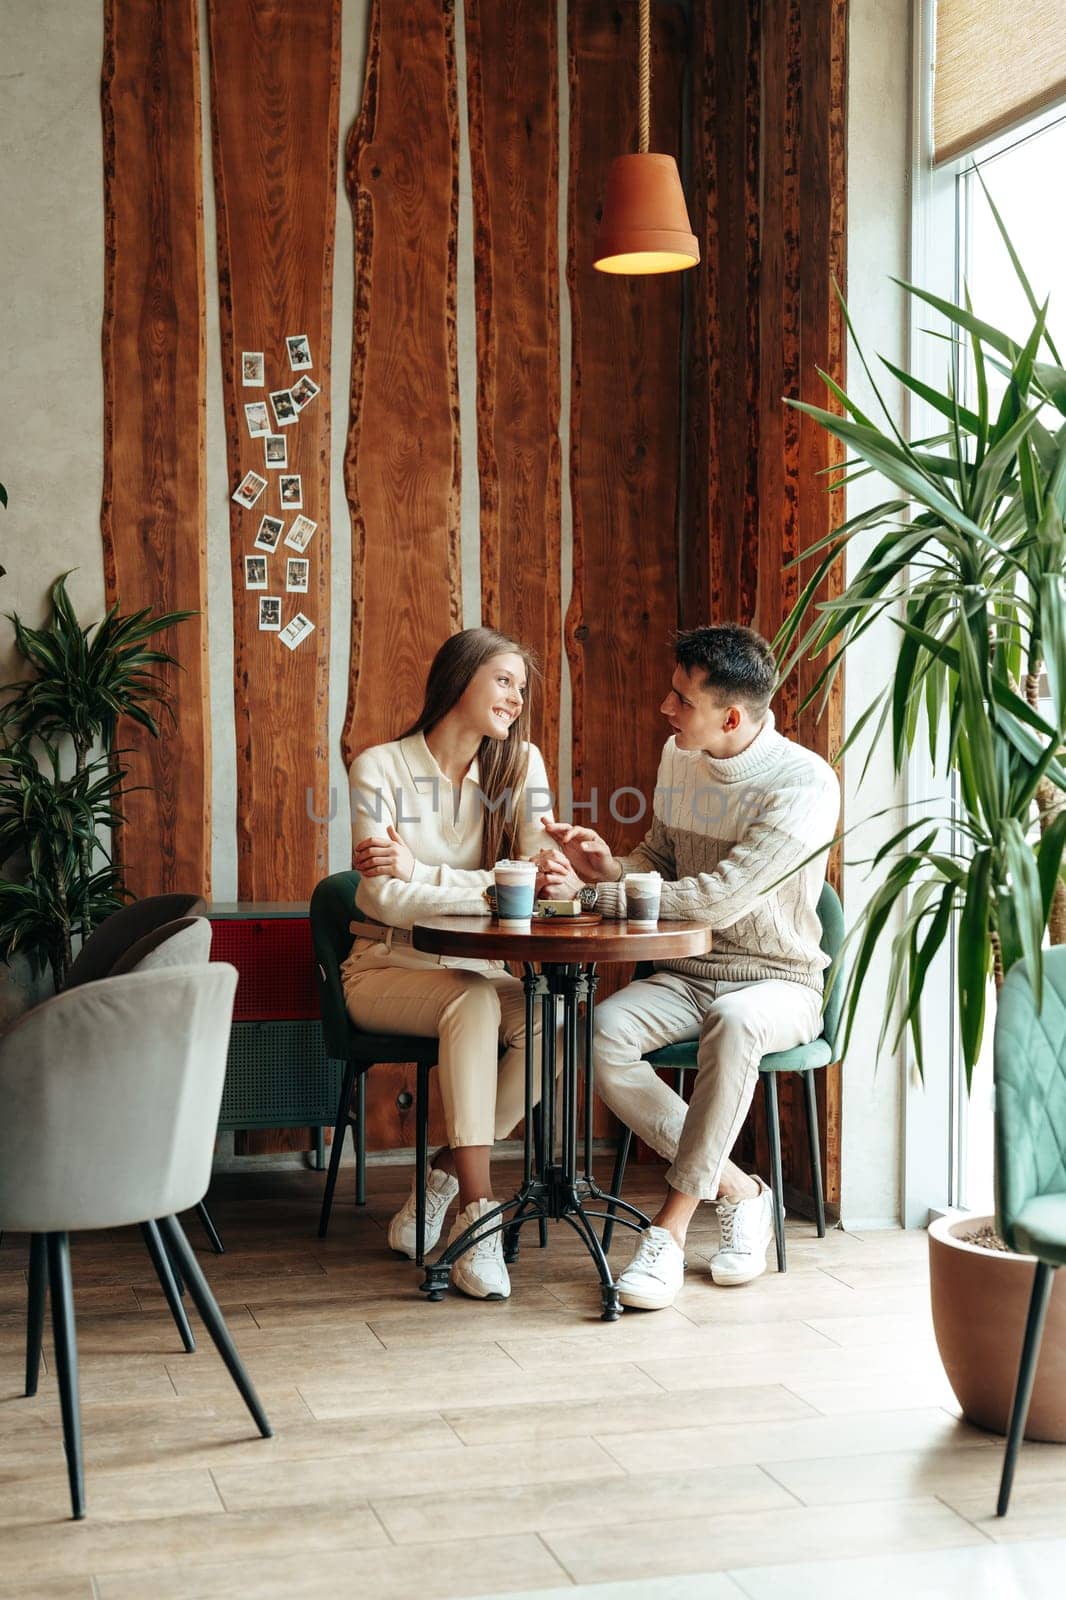 Young Couple Enjoying a Coffee Date at a Cozy Cafe During Afternoon Hours by Fabrikasimf